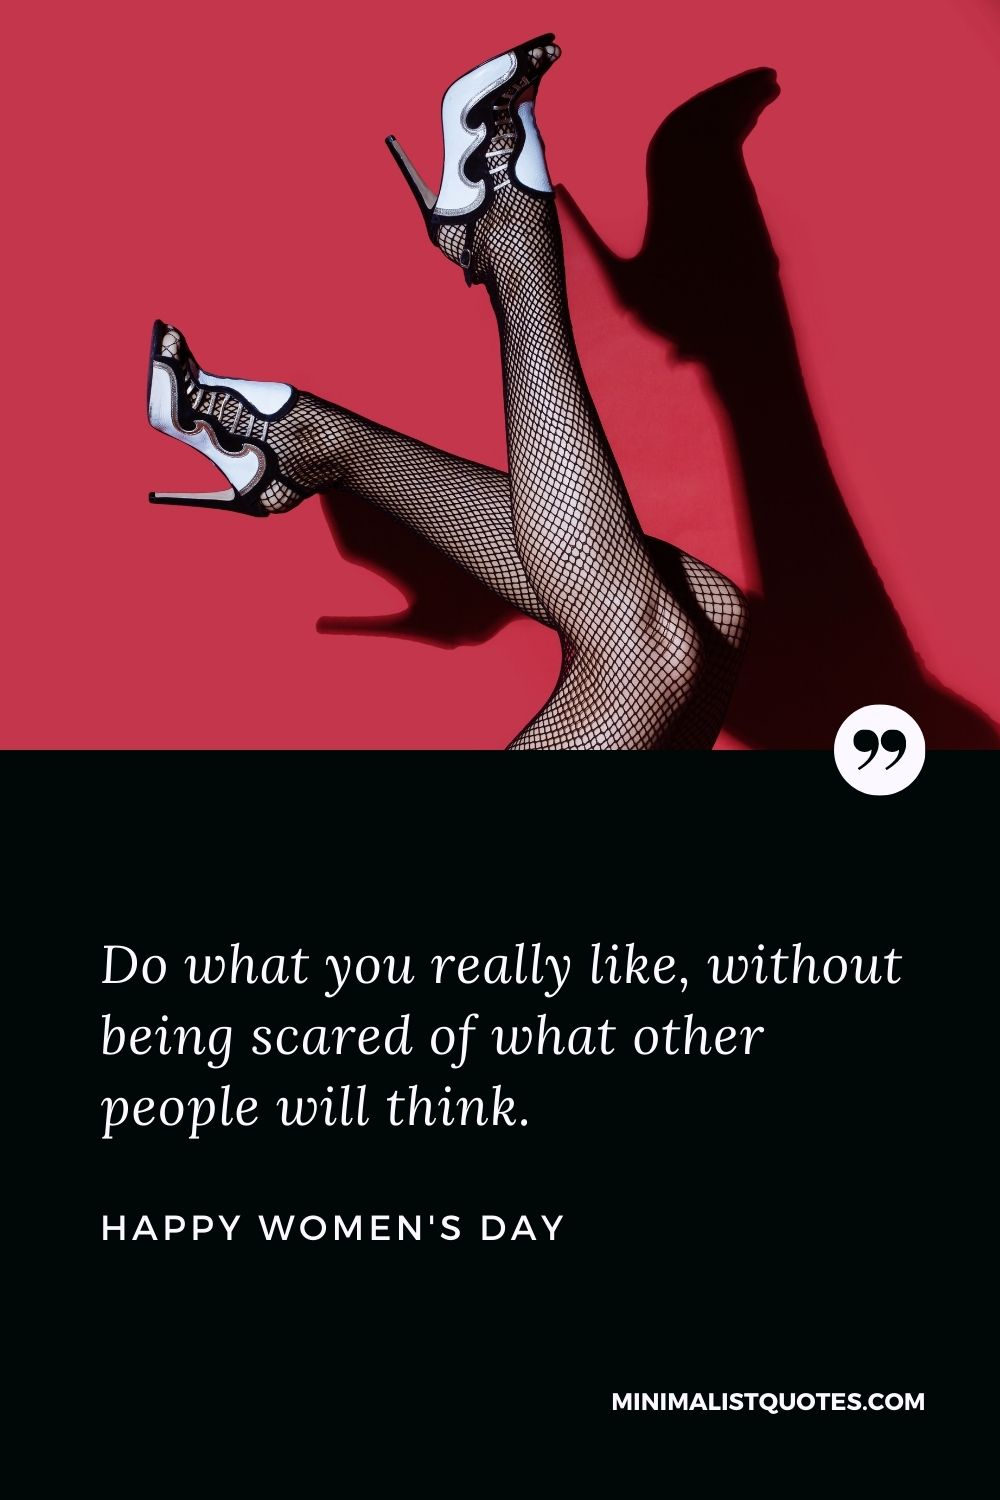 Women's Day Wish & Message: Do what you really like, without being scared of what other people will think.